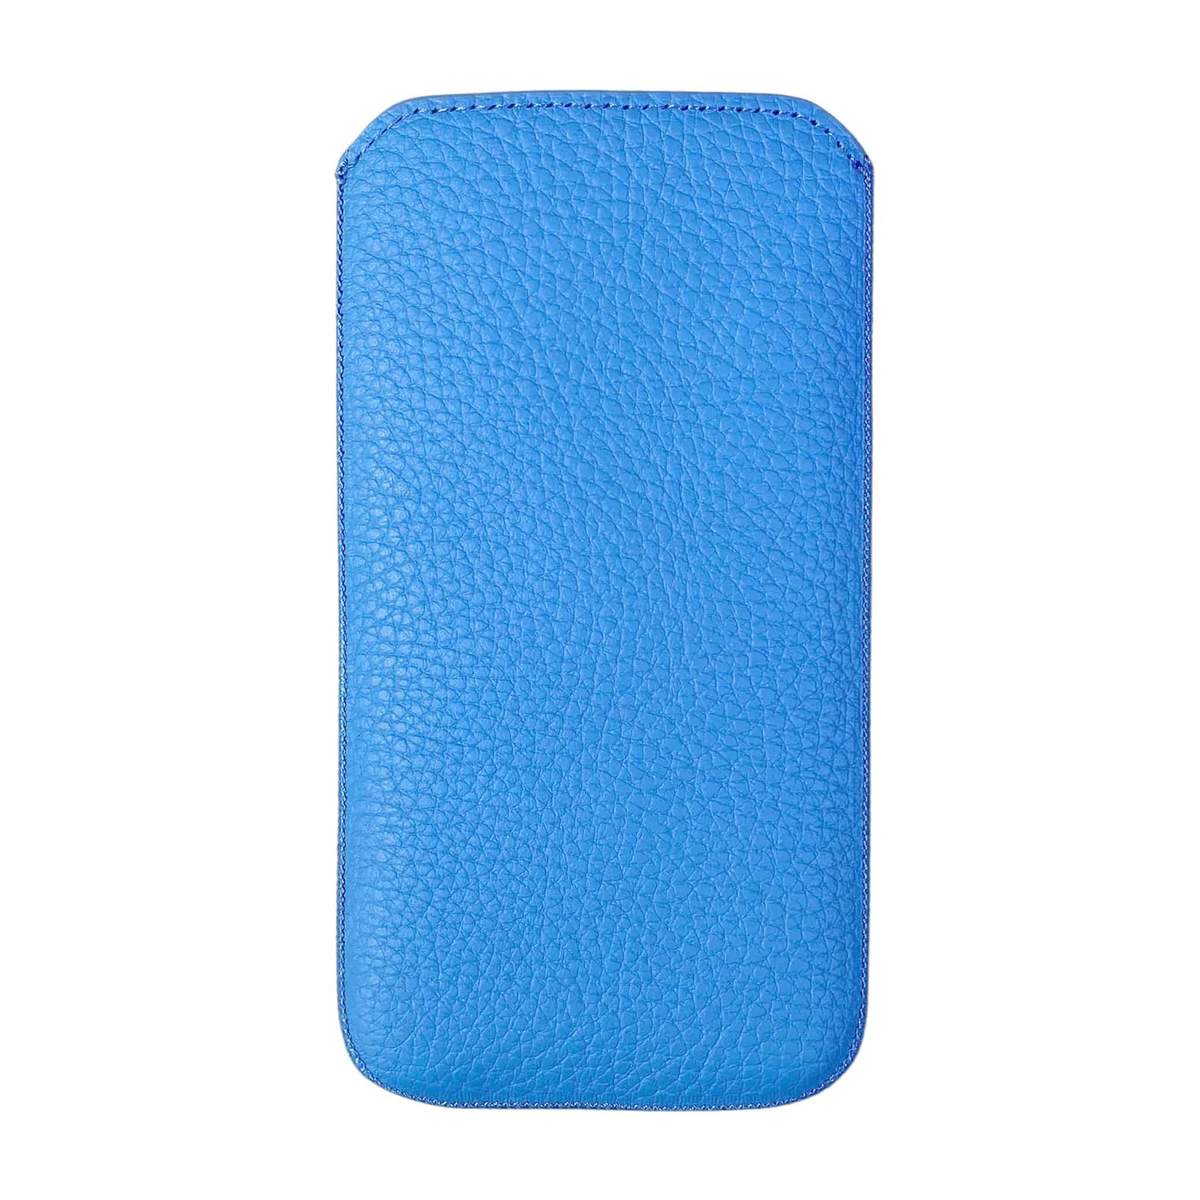 Samsung Galaxy A52 / A52 5G Genuine Leather Pouch Case | Artisanpouch ...